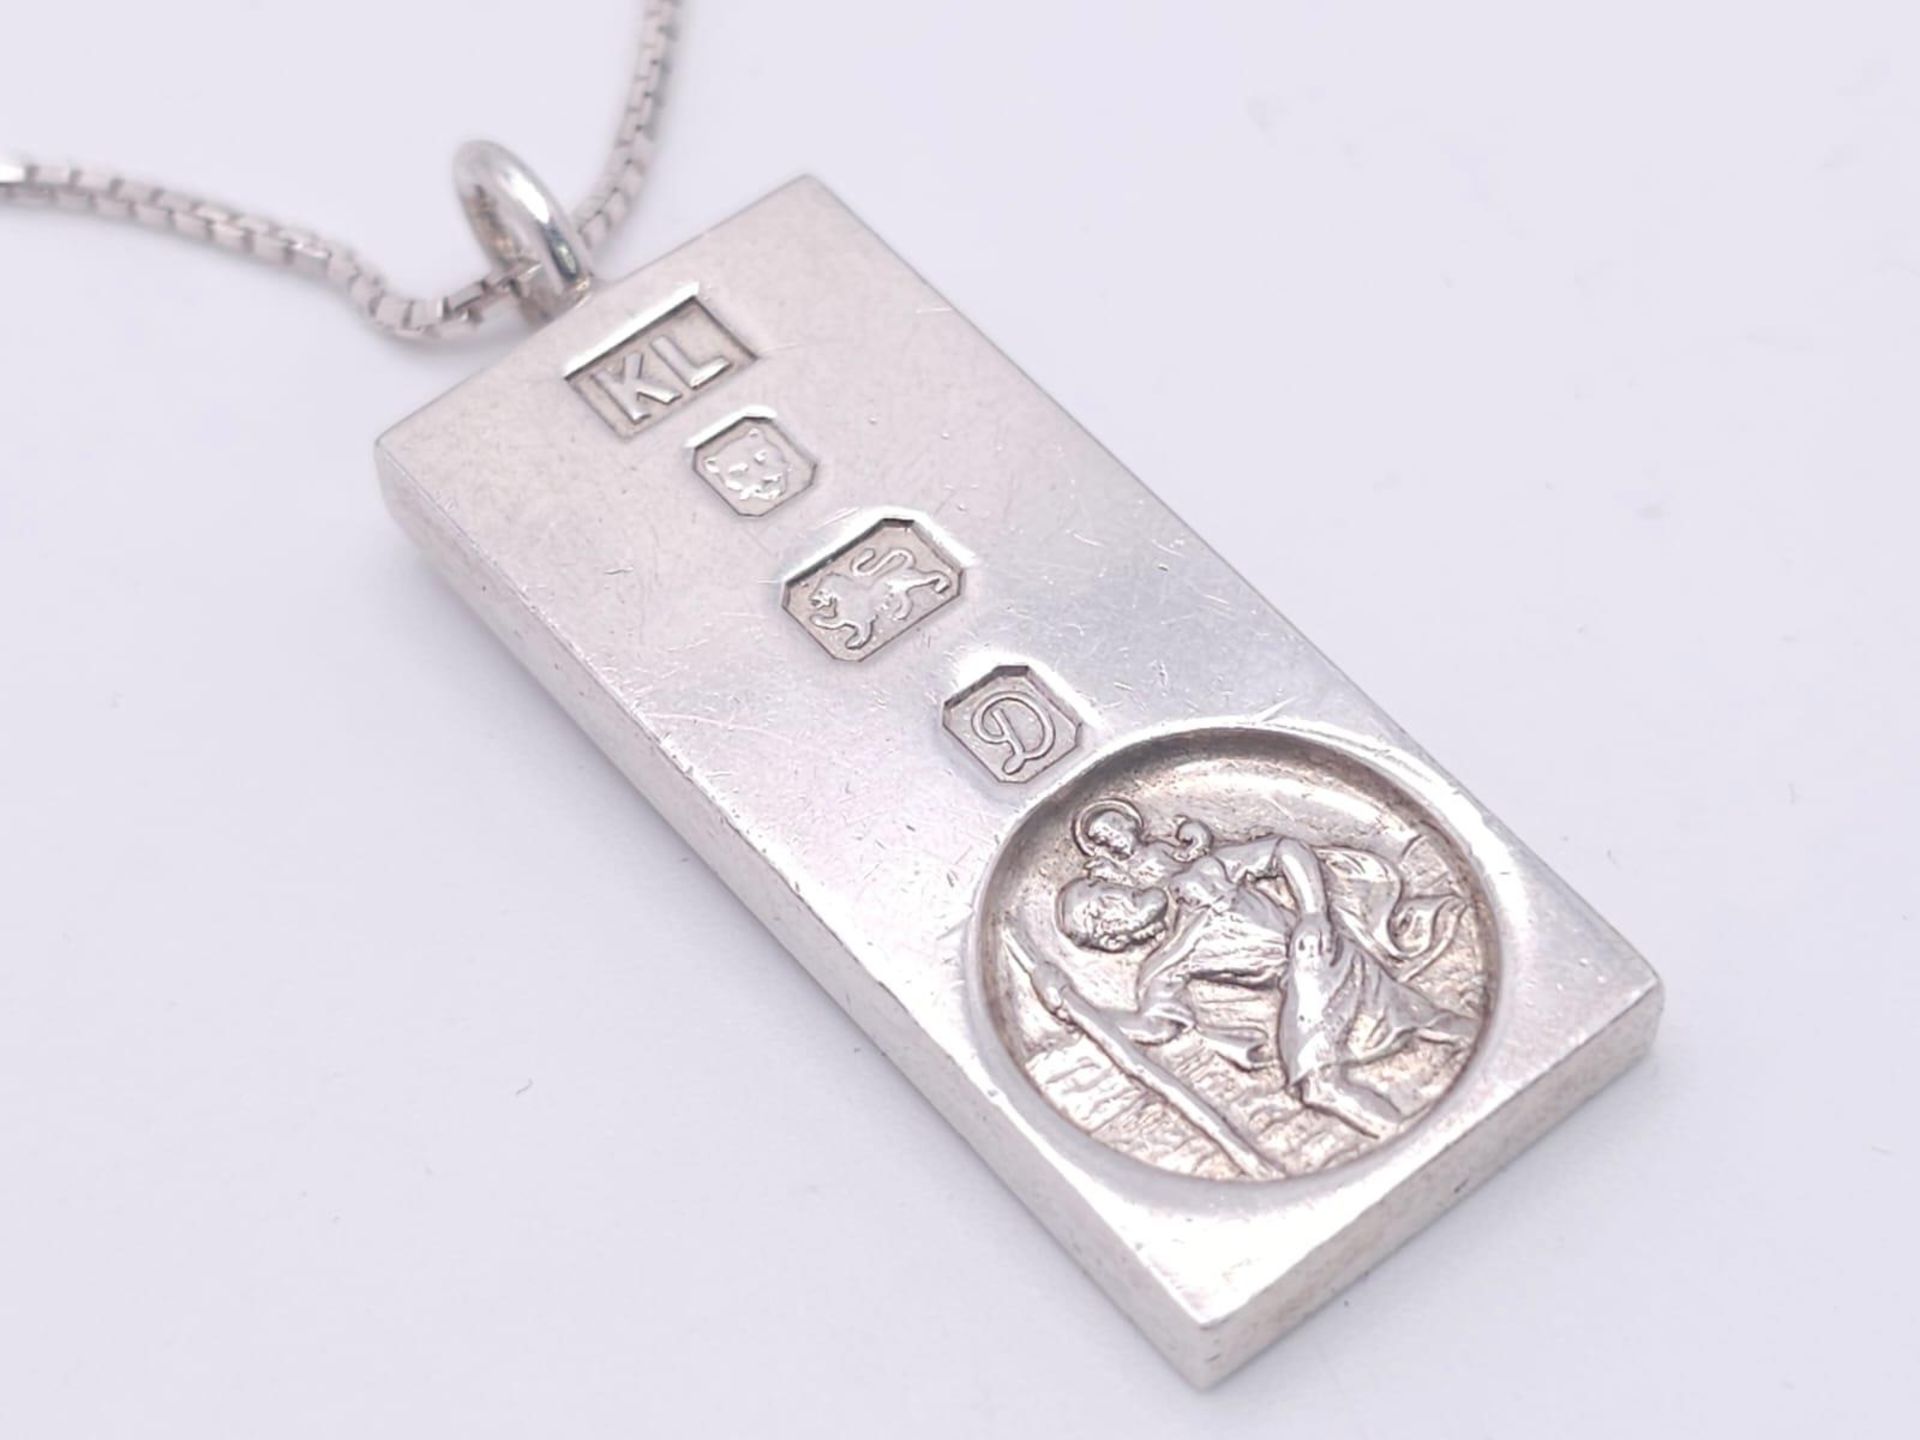 A Sterling Silver St. Christopher Ingot Pendant on a Silver Necklace. 5cm - pendant. 58cm necklace - Image 2 of 13